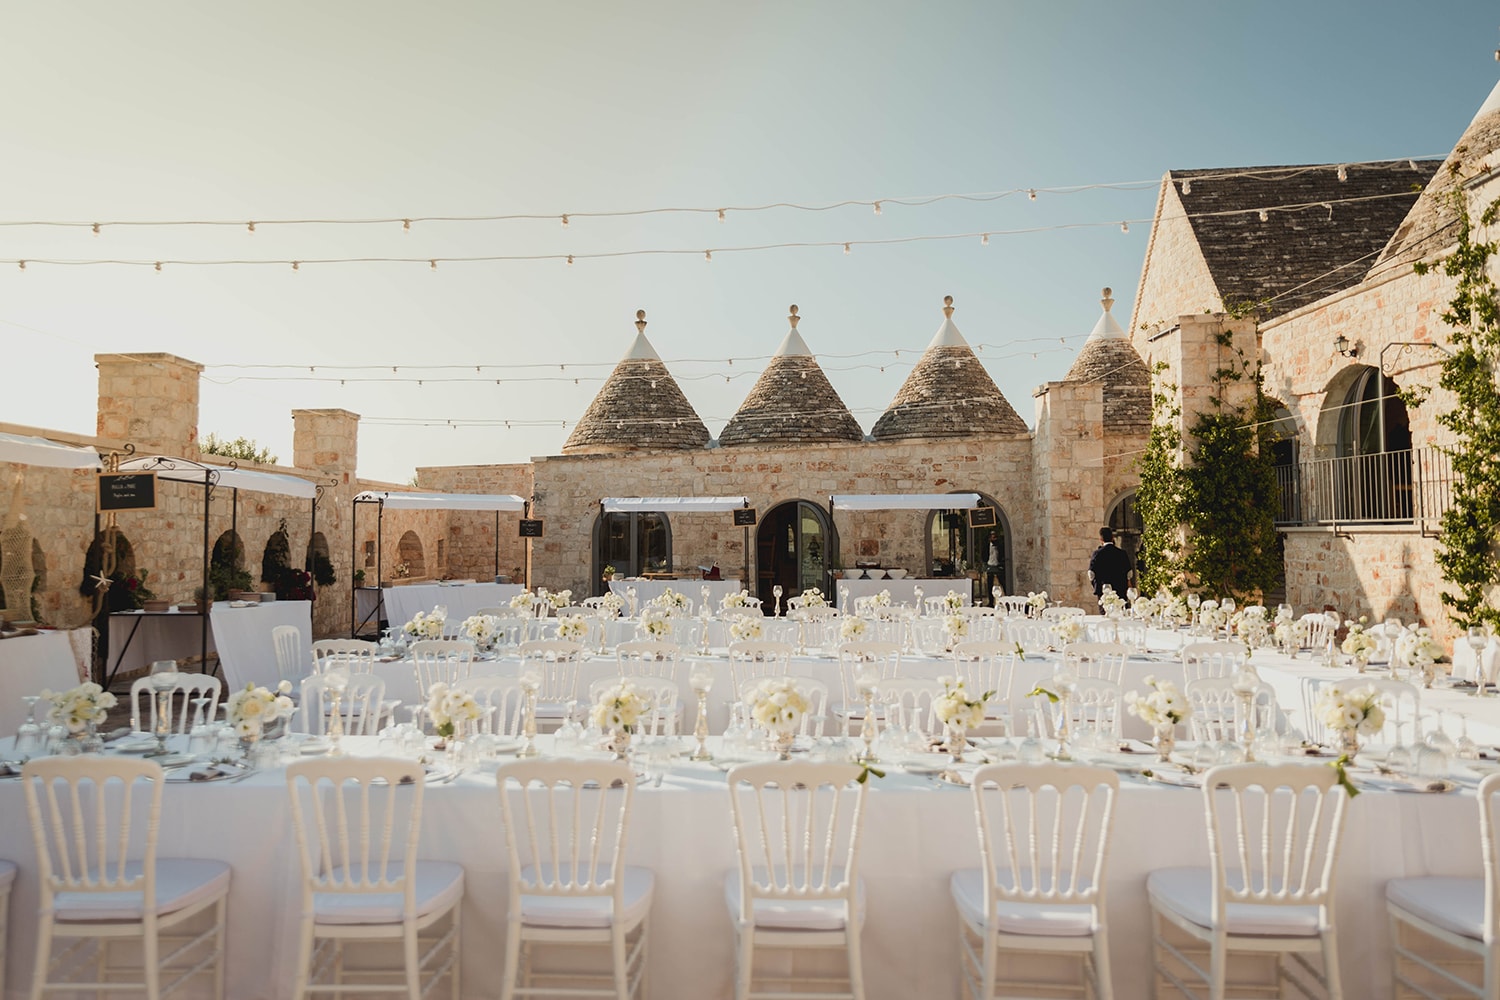 Here are 15 of the most magical wedding venues in Puglia, Italy you should know about